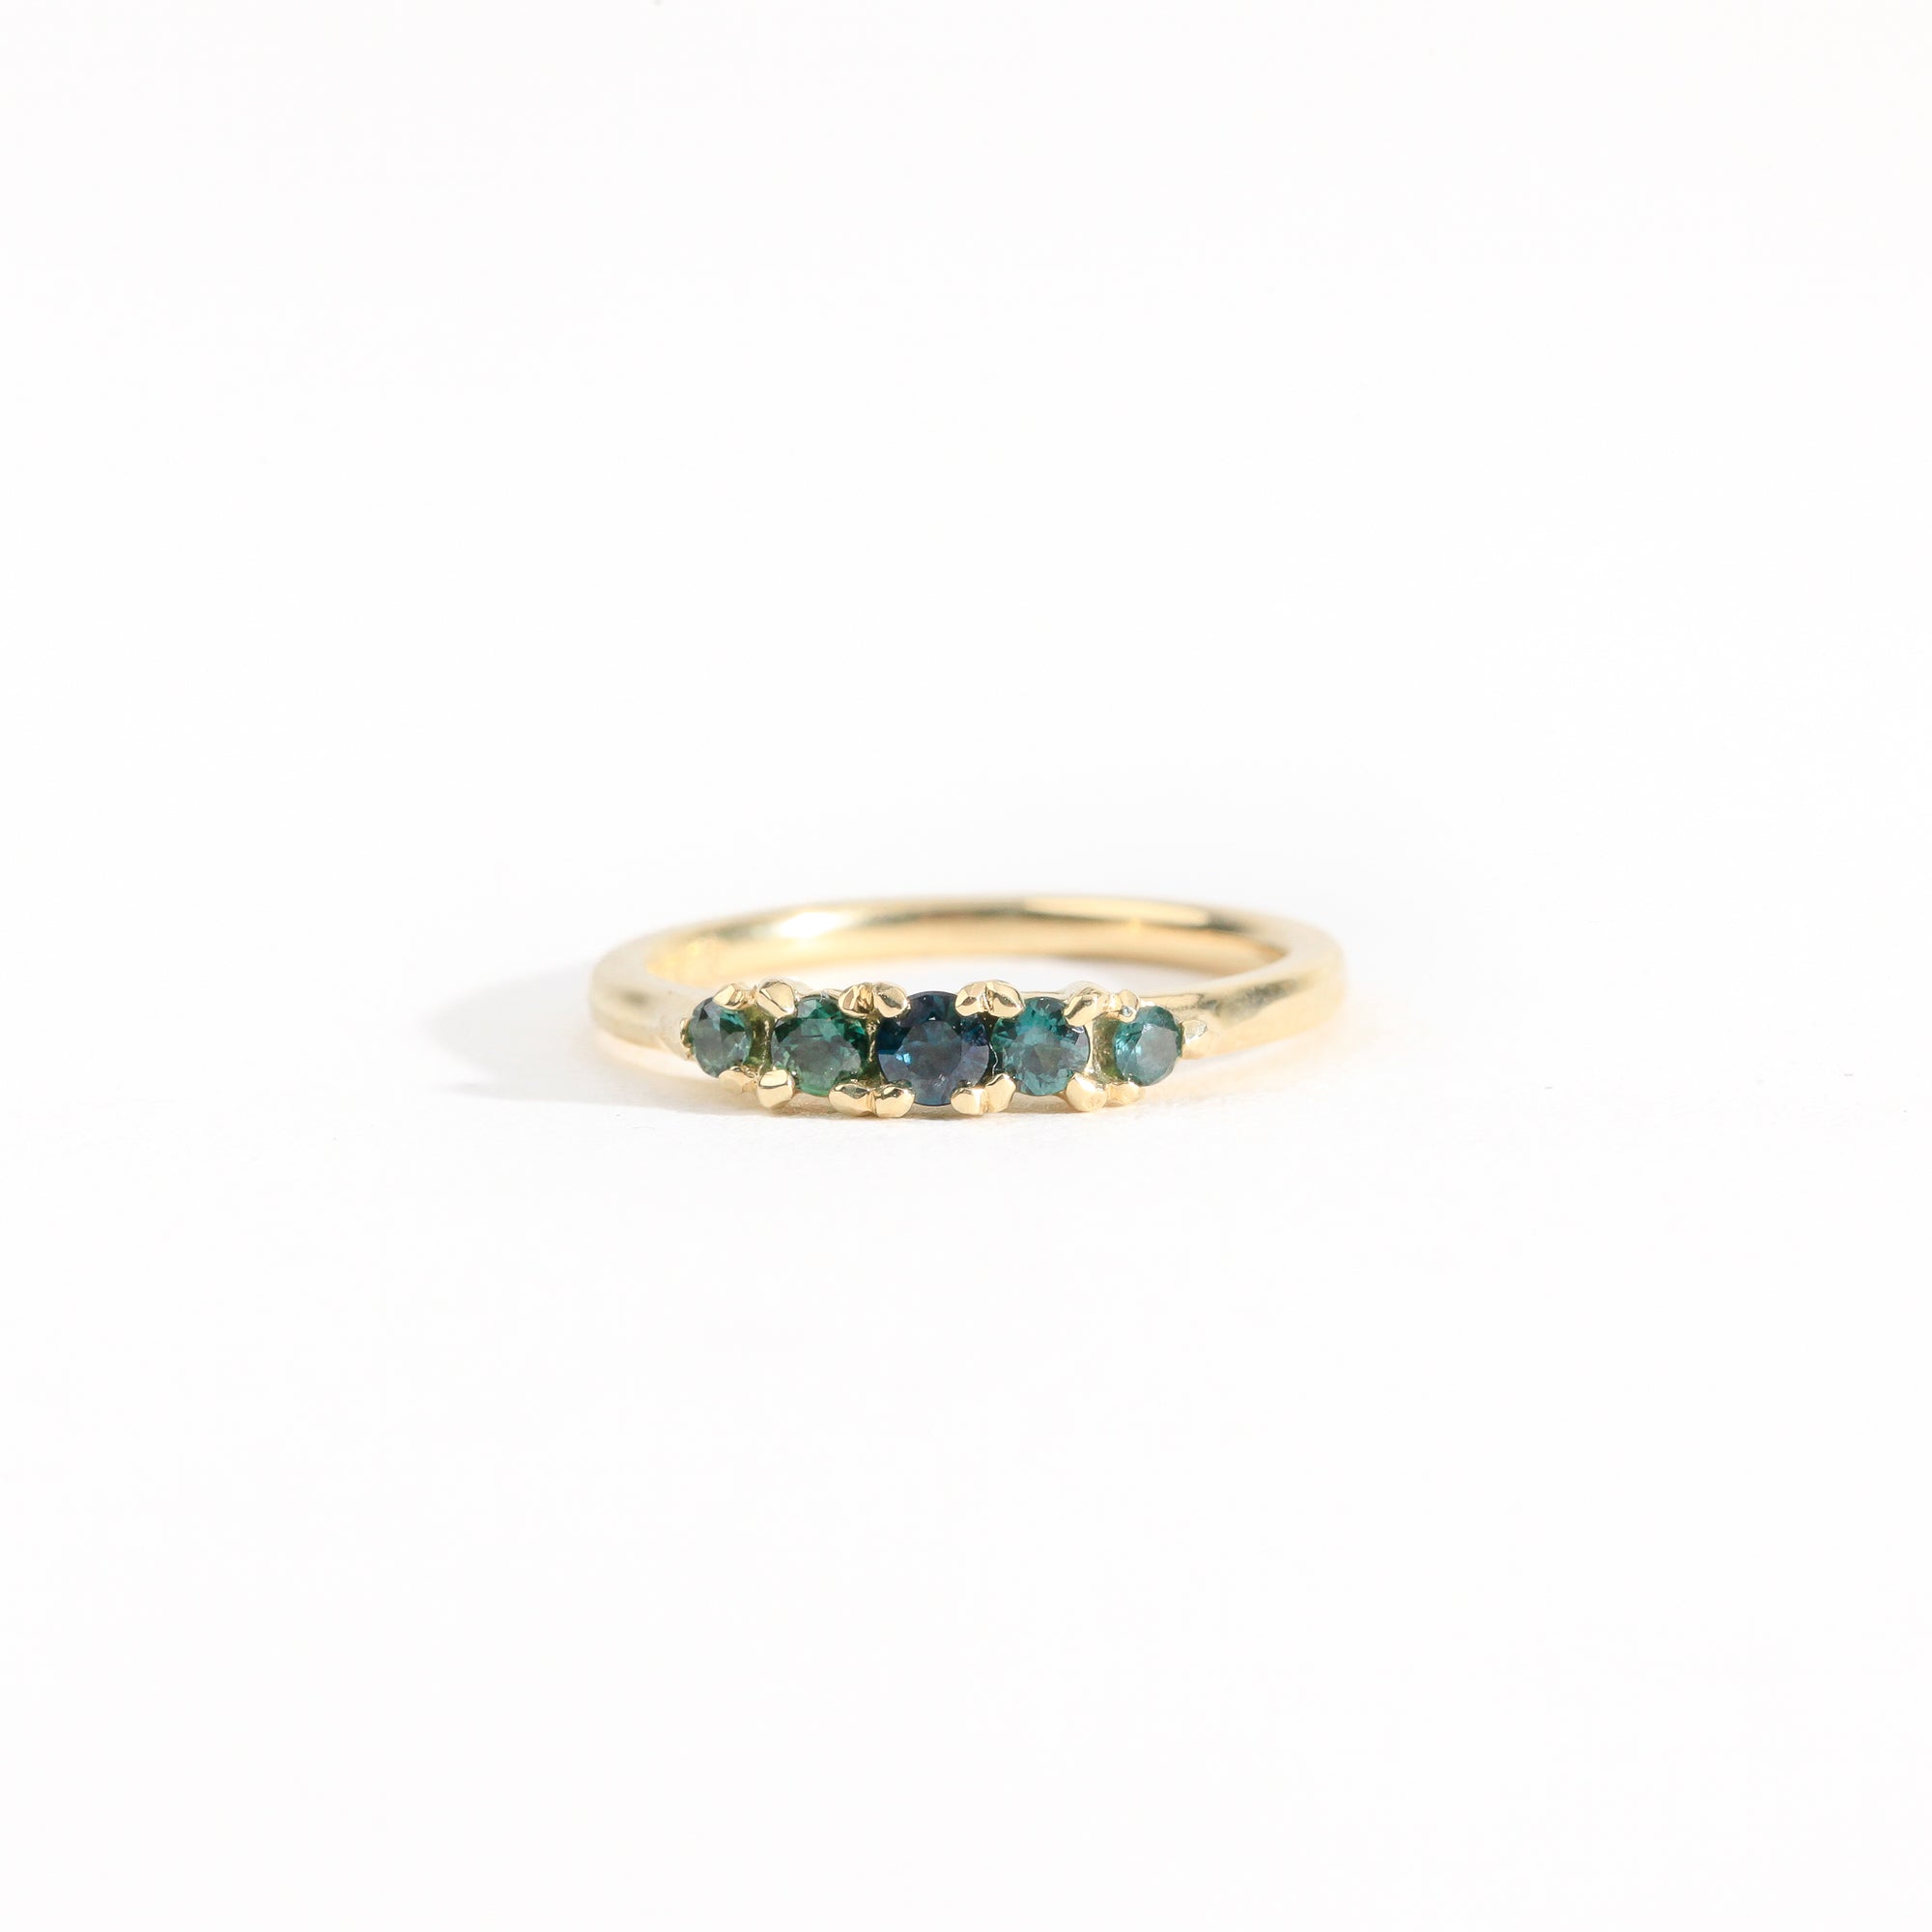 A bespoke handcrafted five stone ring in yellow gold with ethically sourced Australian teal sapphires